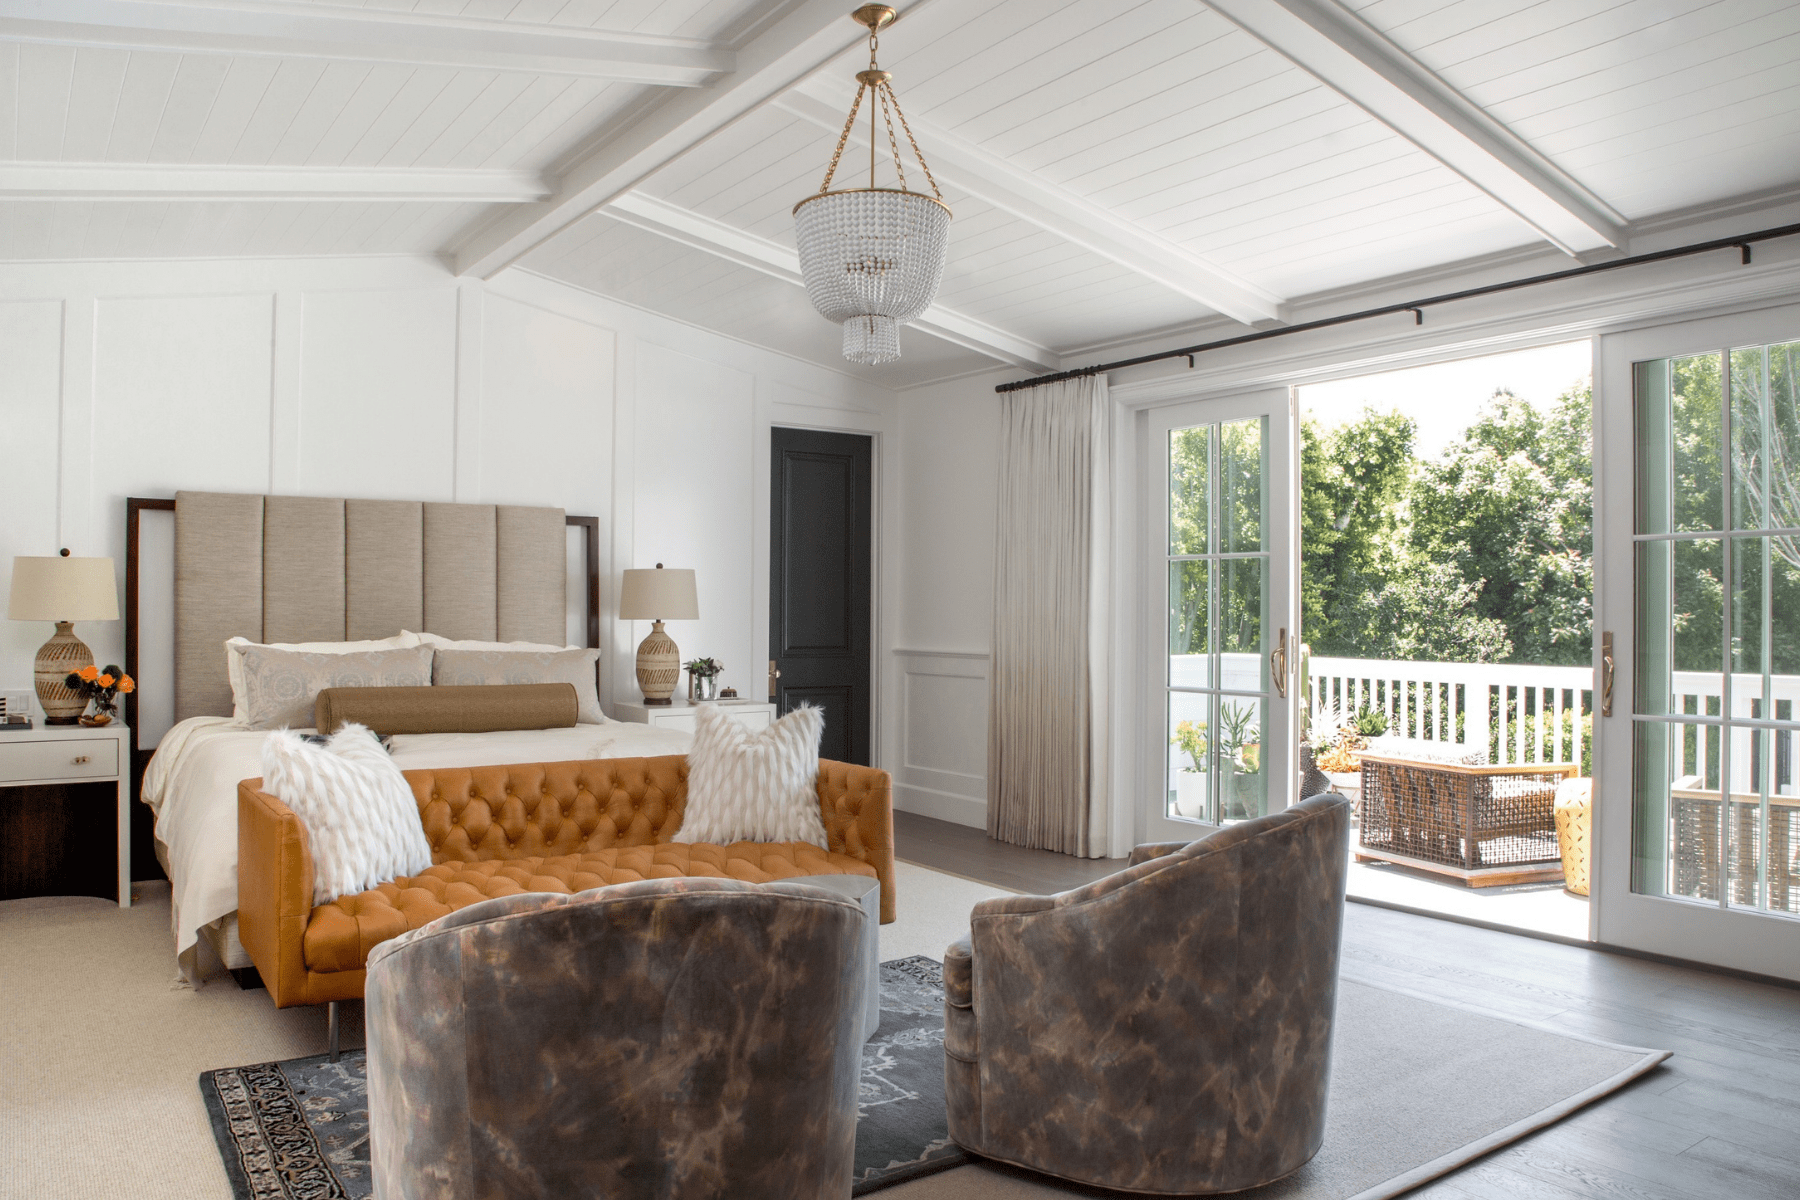 A California-Moroccan Glam style bedroom with sloped ceilings and reupholstered furnishings.